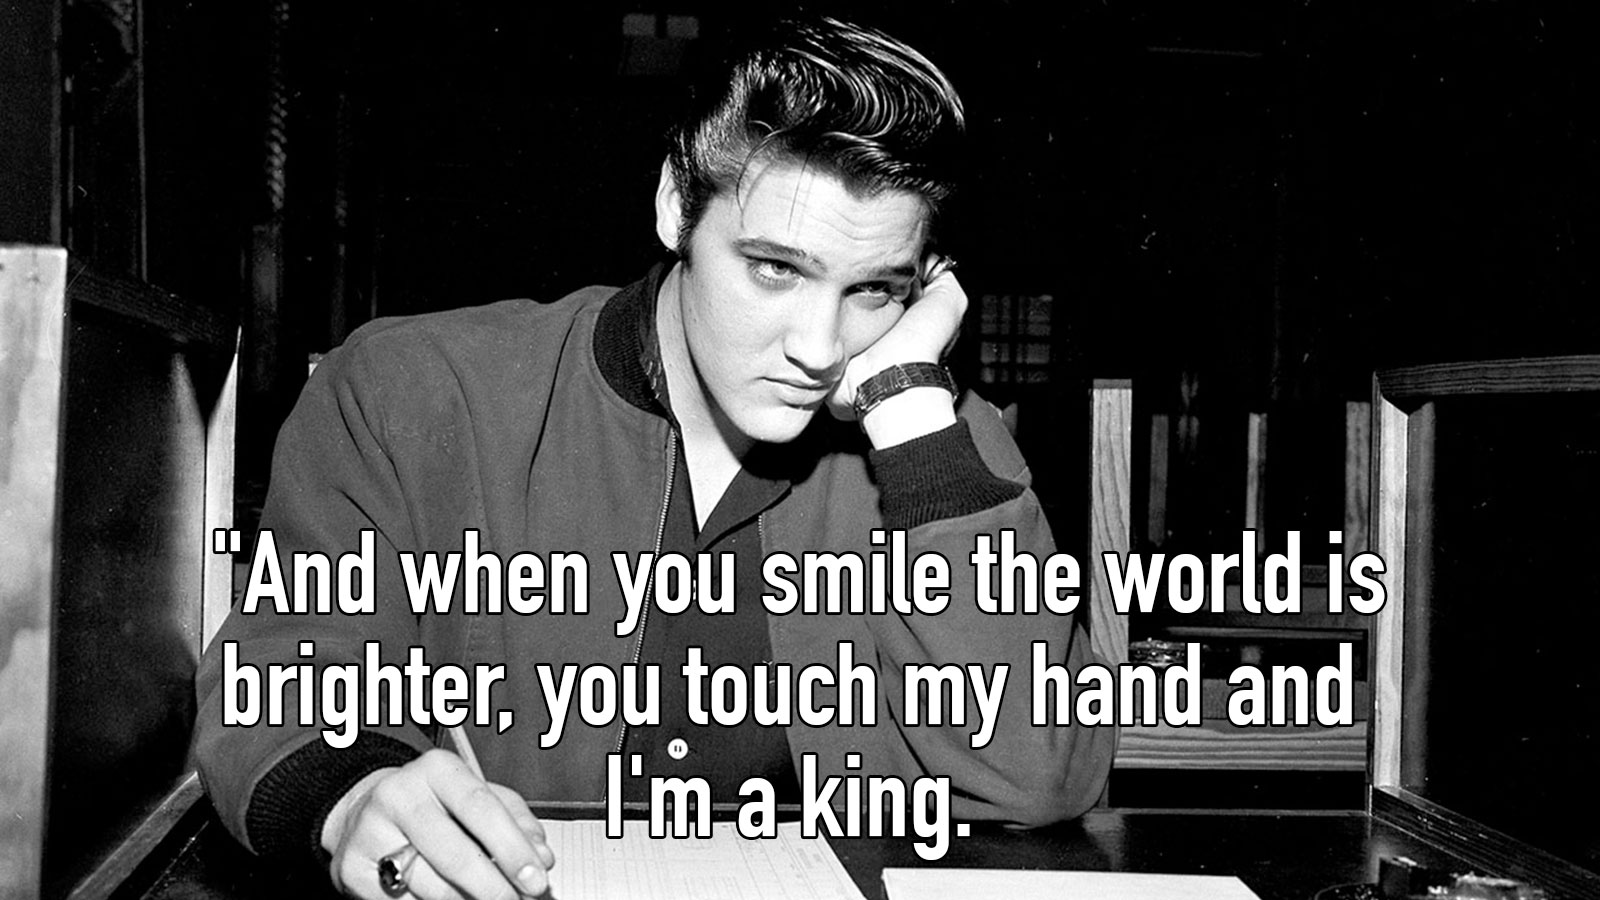 Can You Guess the Elvis Presley Song This Lyric Is From? Quiz 71